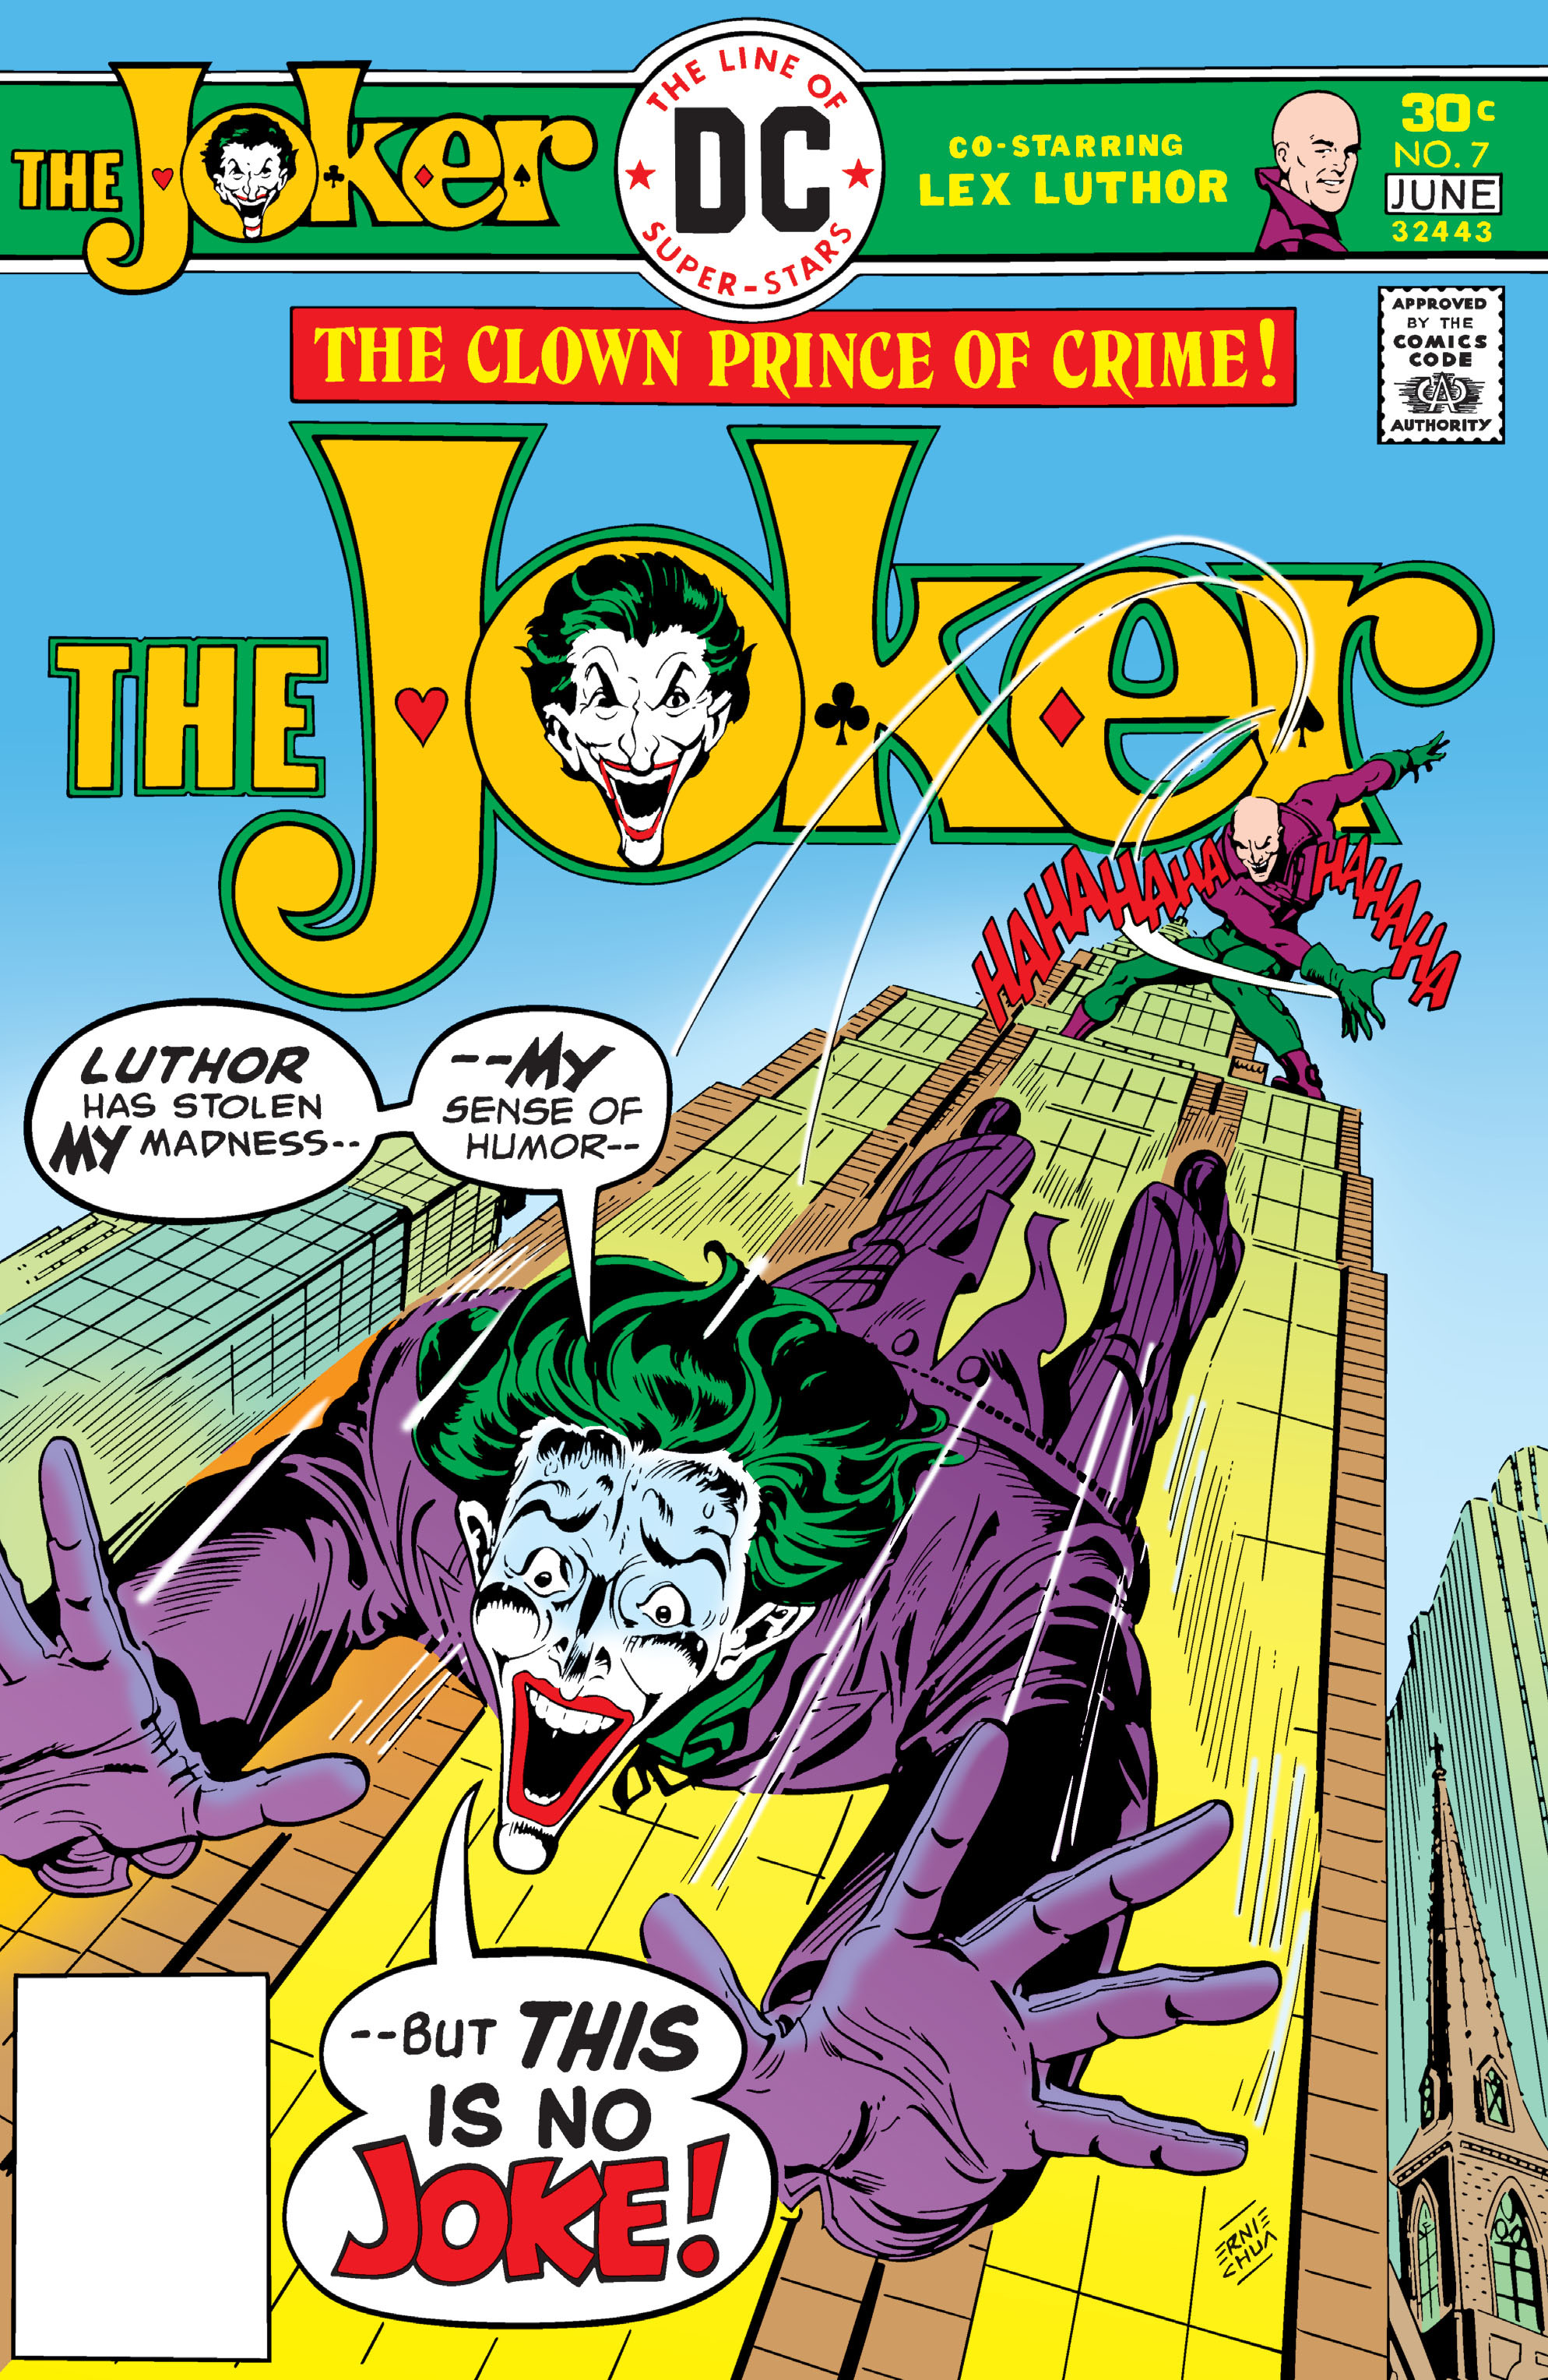 The Joker (1975-1976 + 2019): Chapter 7 - Page 1